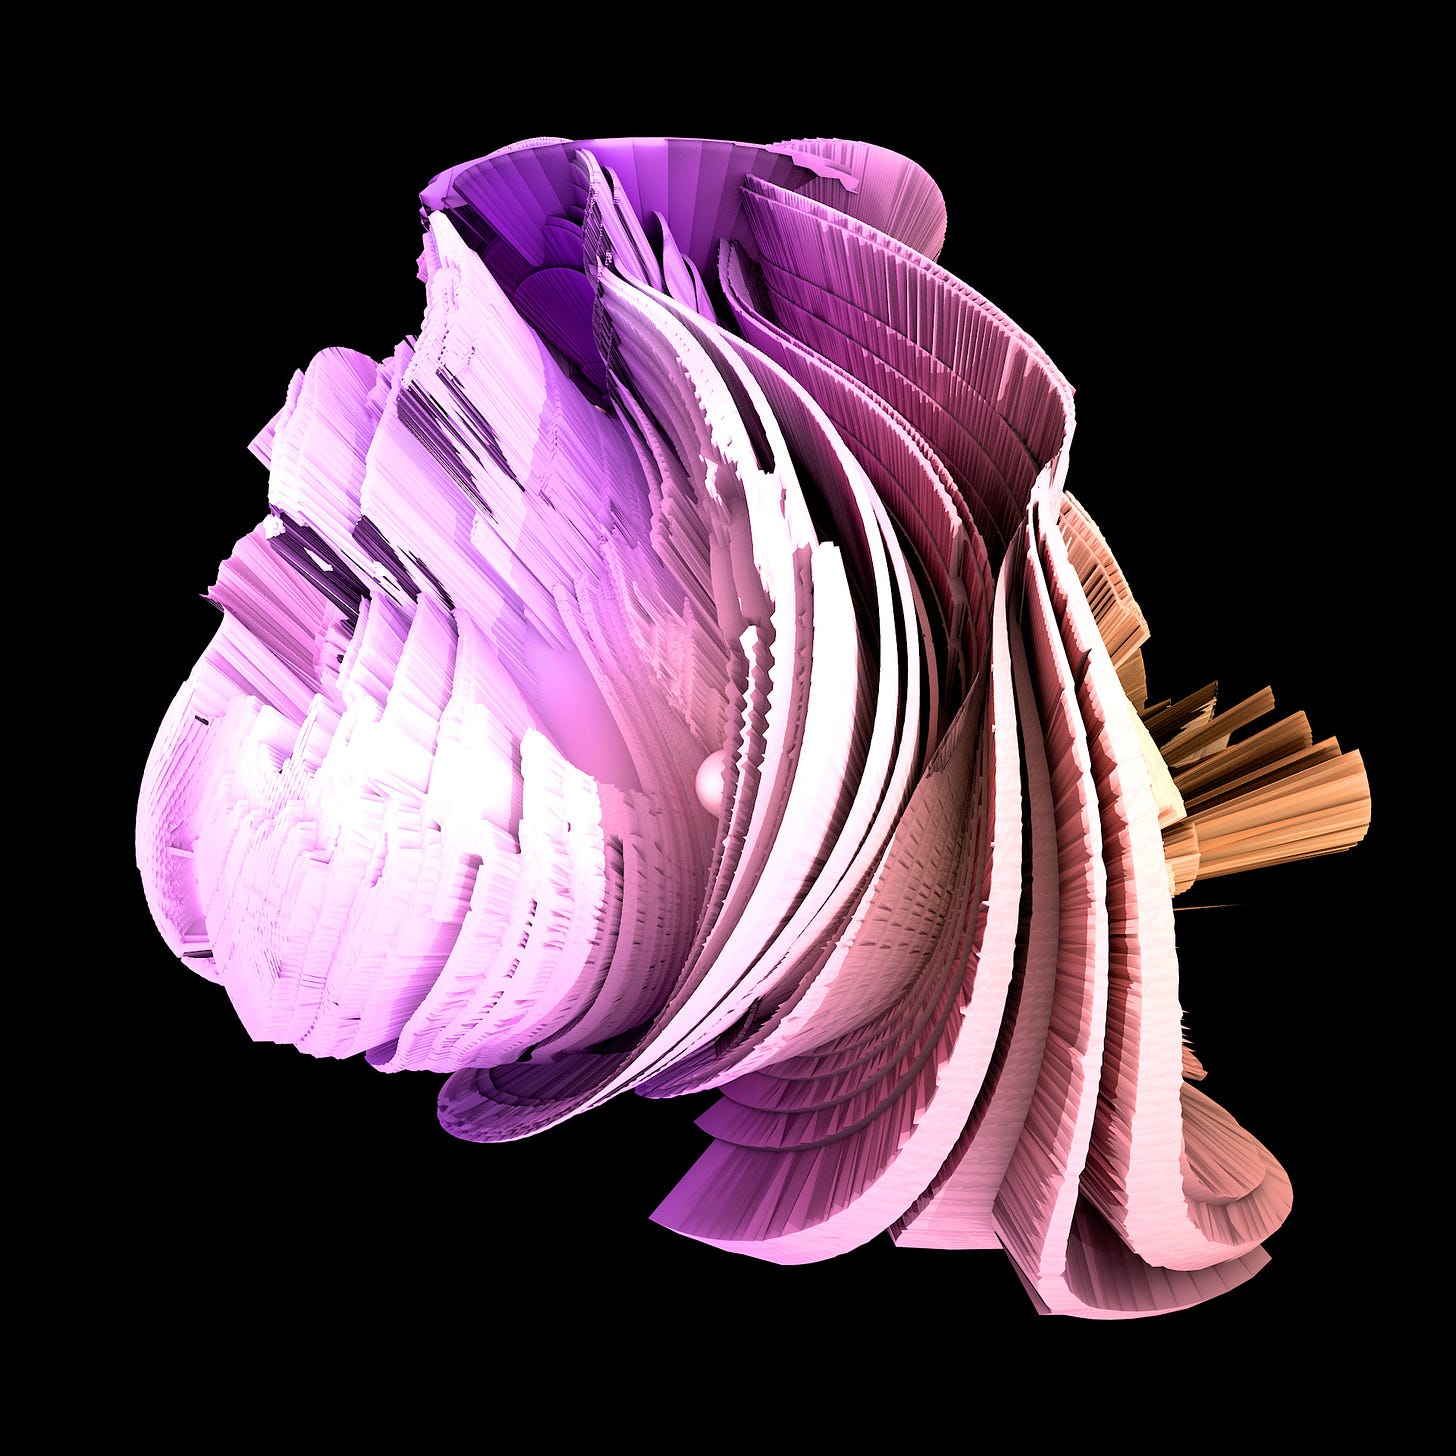 The image is abstract and digital, but looks like a shell with spirals and a lot of detail. It is purple and white with a black background.